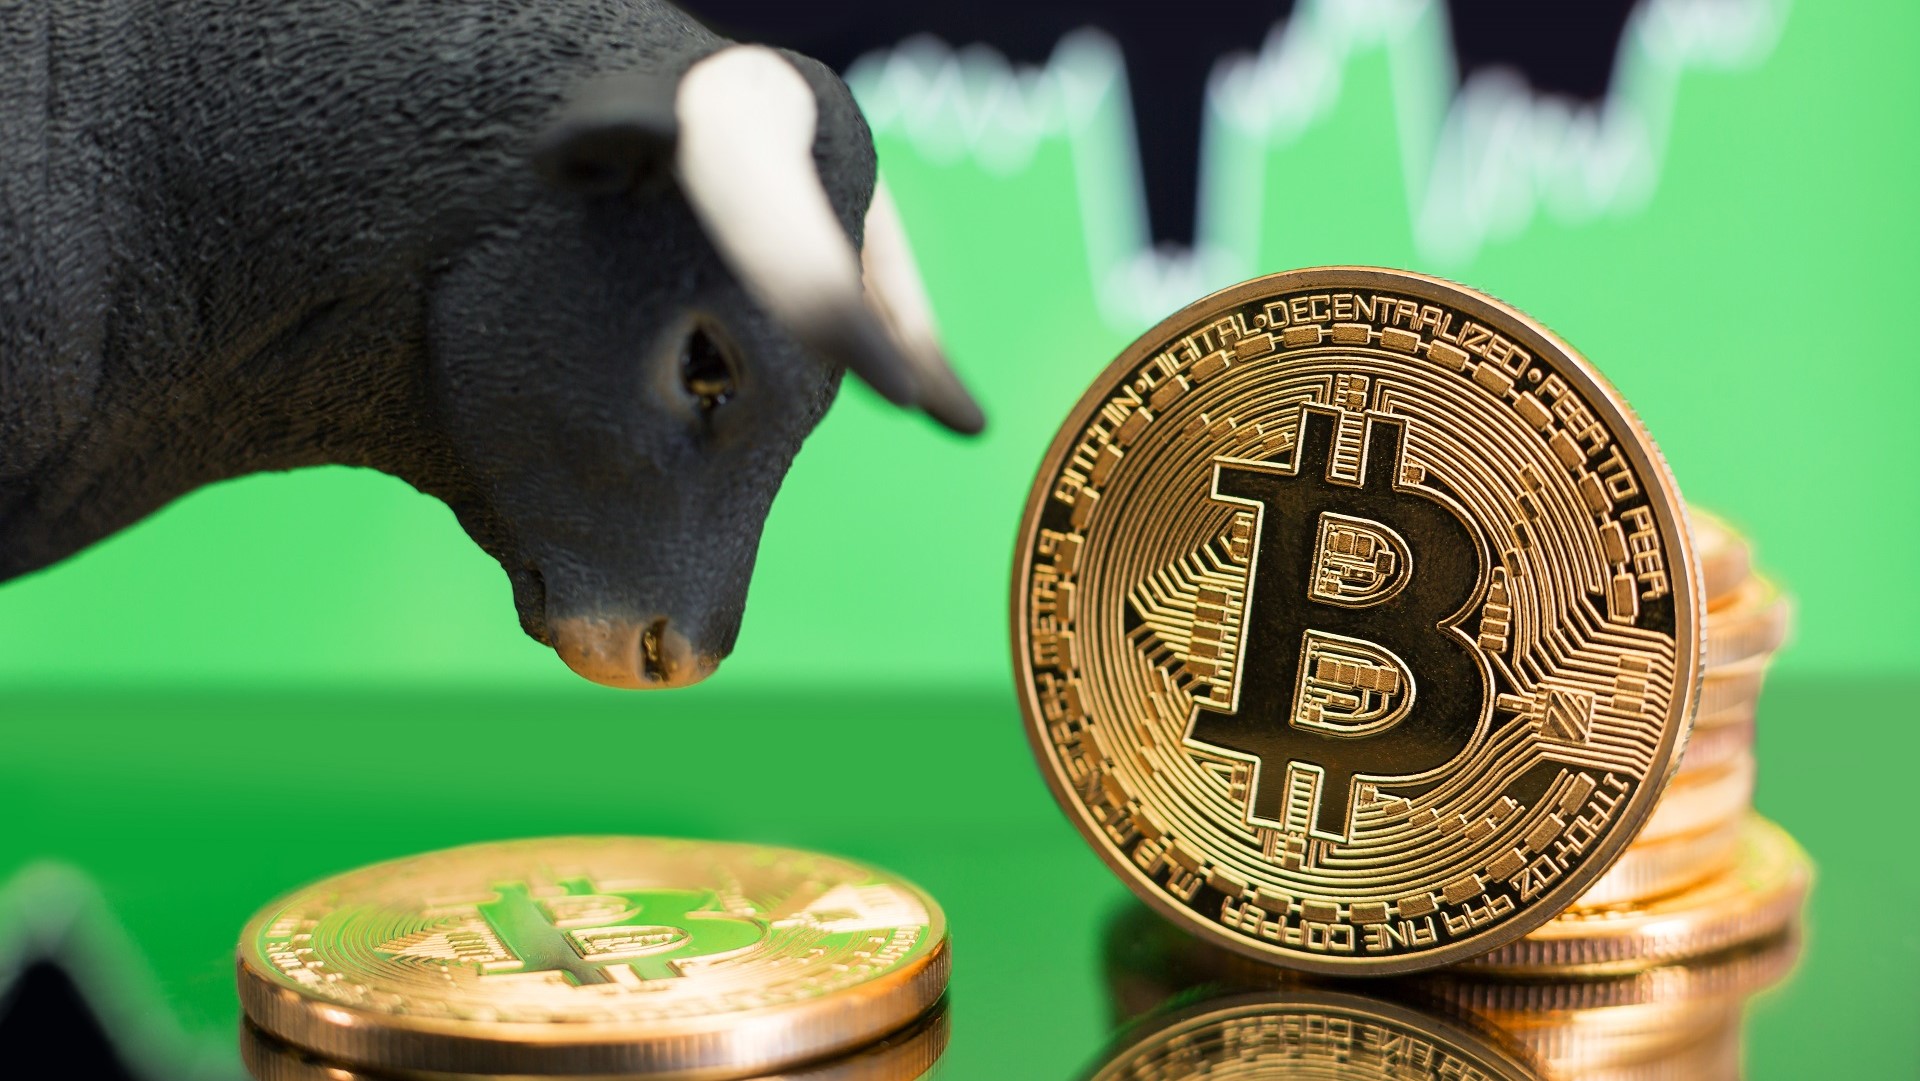 Bitcoin Could See Another Bull Rally If This Happens